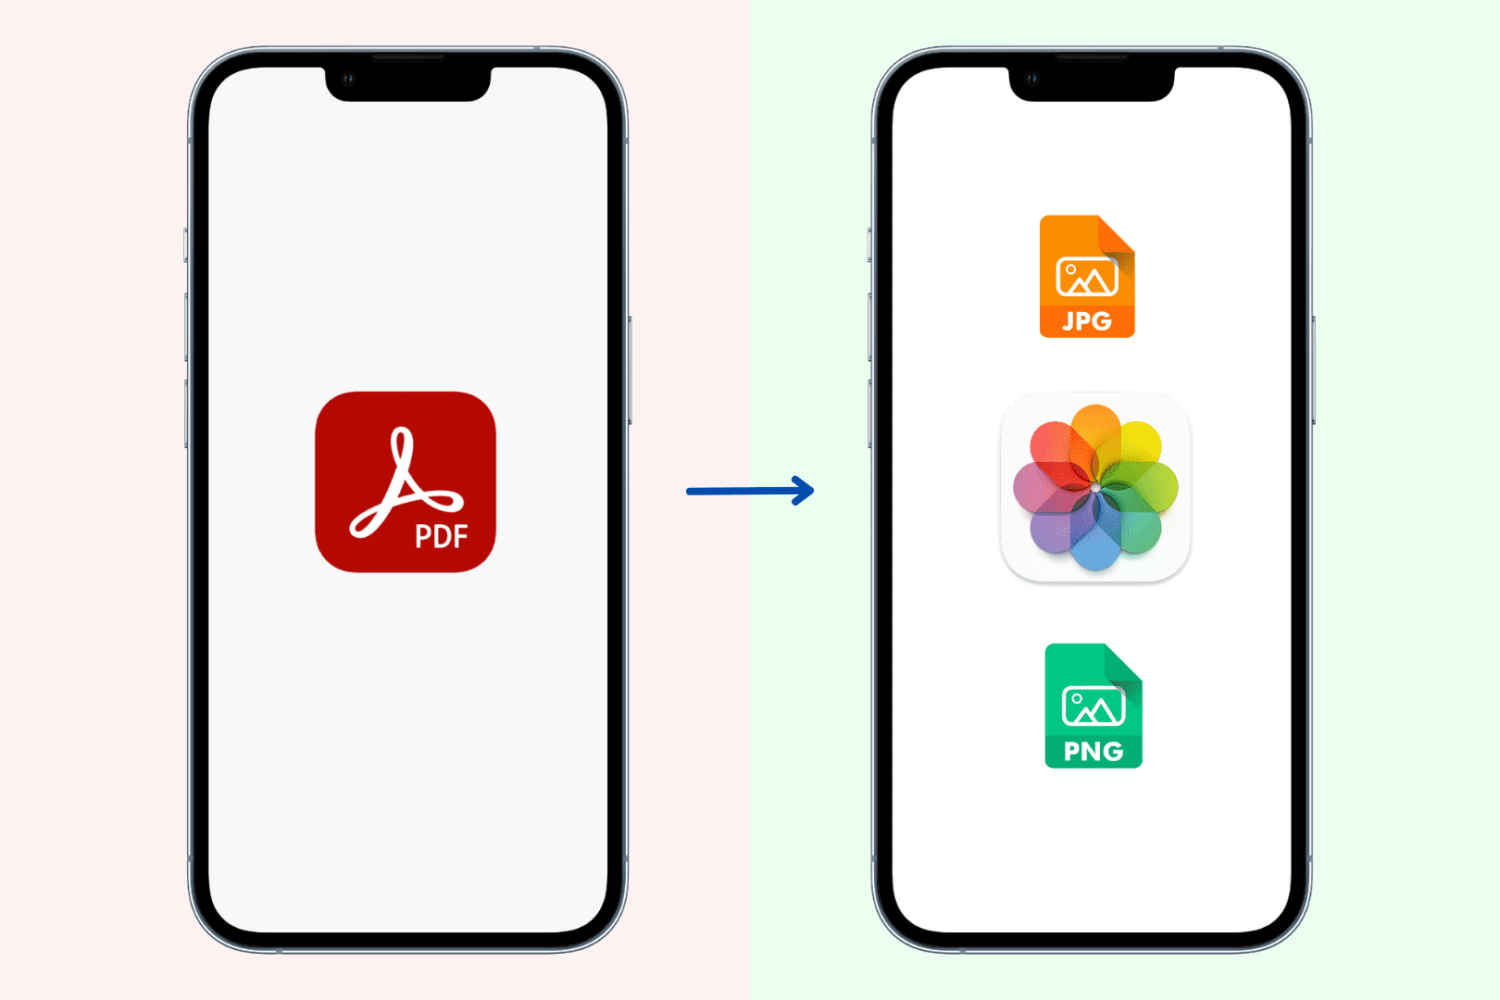 Convert PDF to image on iPhone